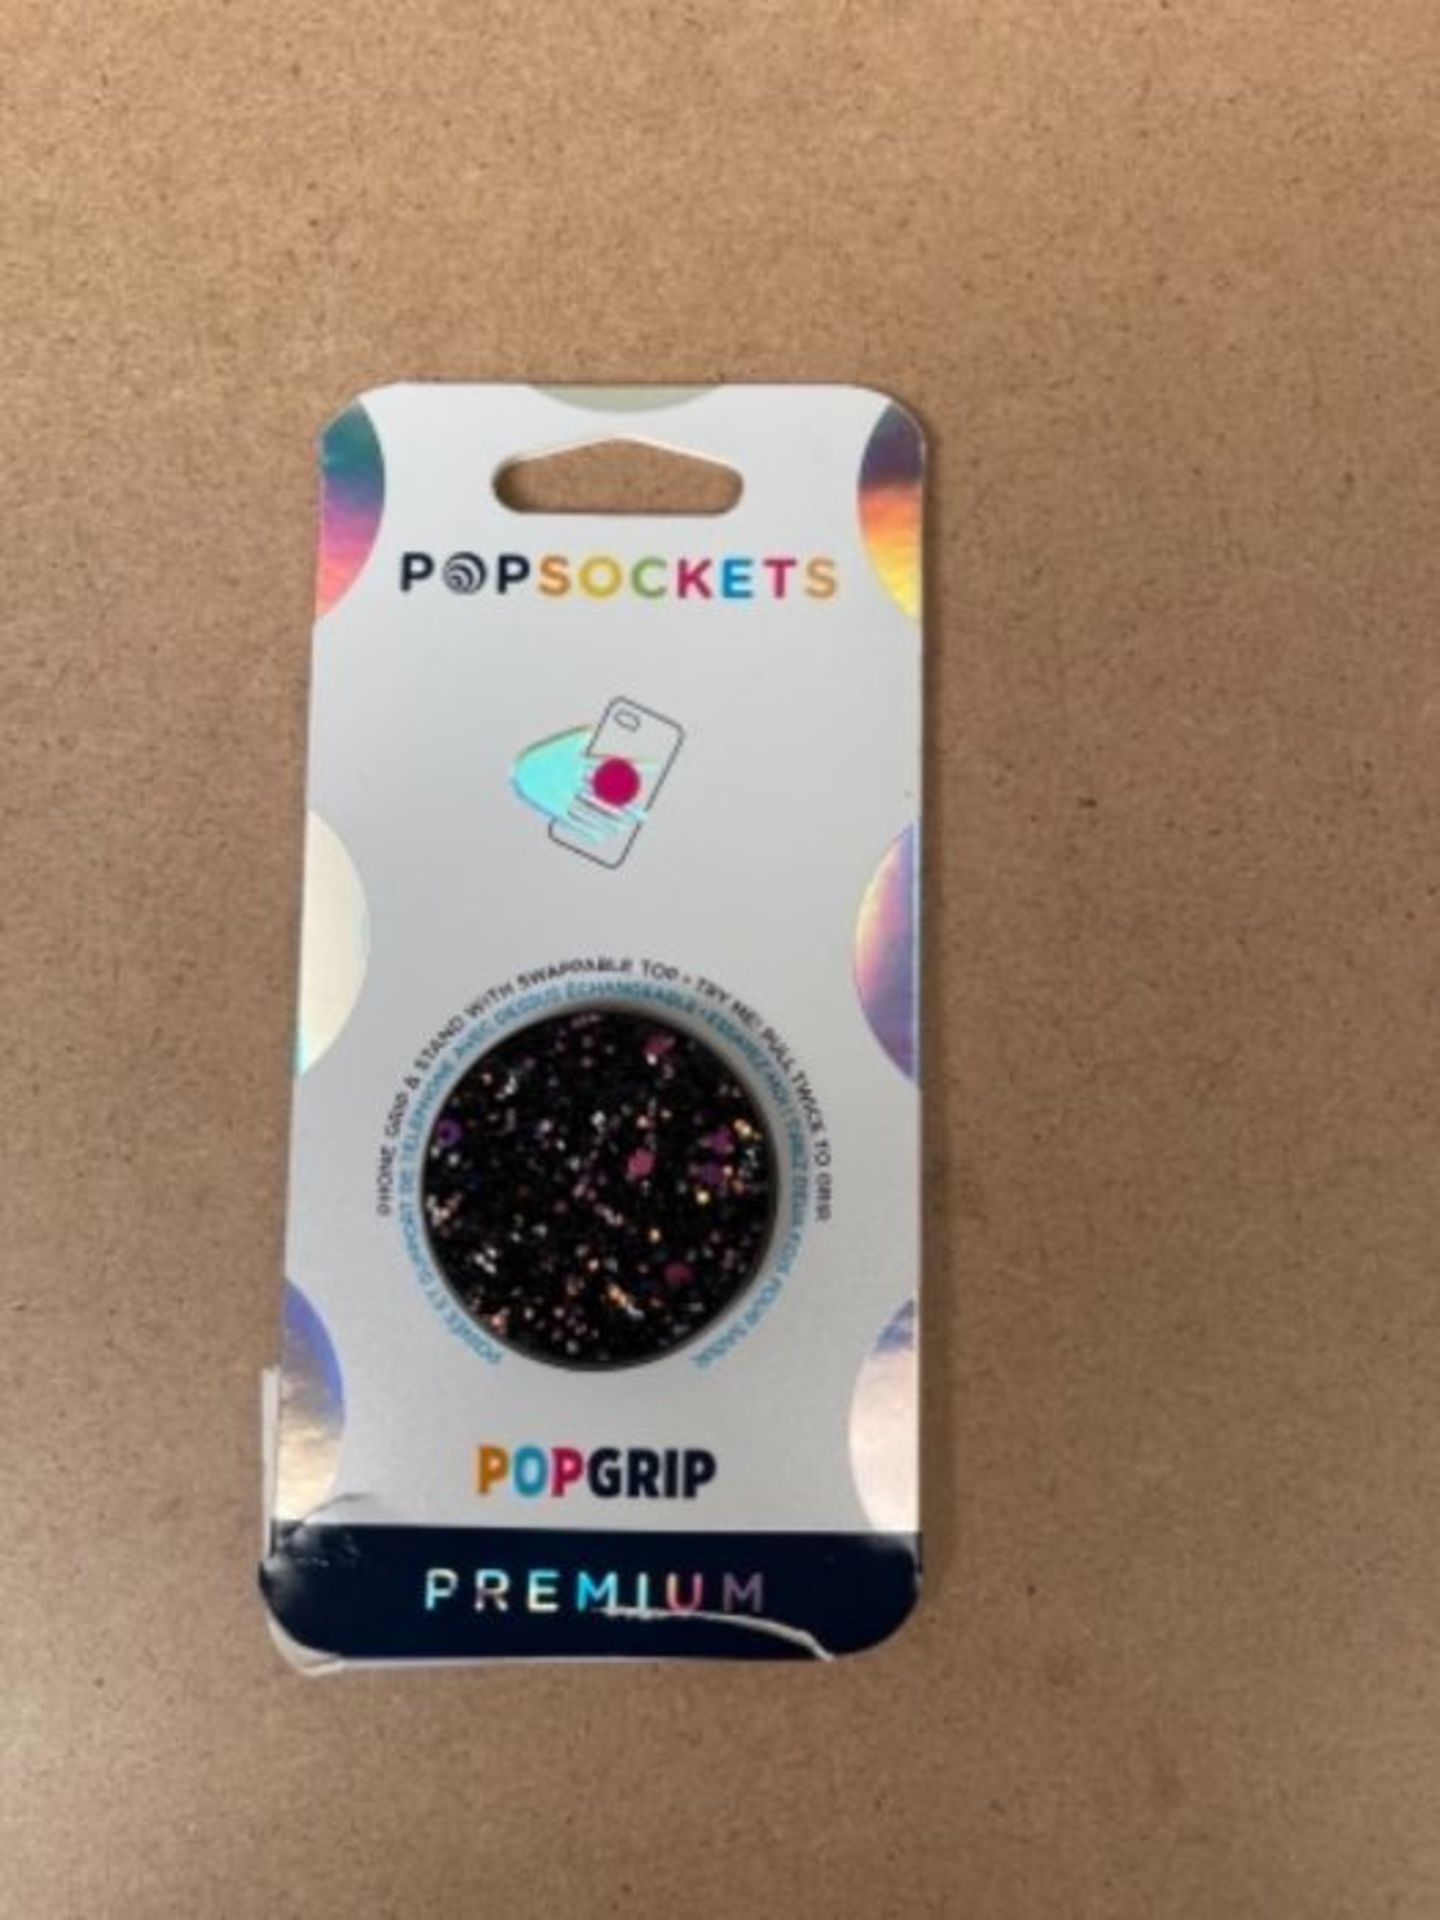 PopSockets PopGrip - Expanding Stand and Grip with Swappable Top - Sparkle Black - Image 2 of 2